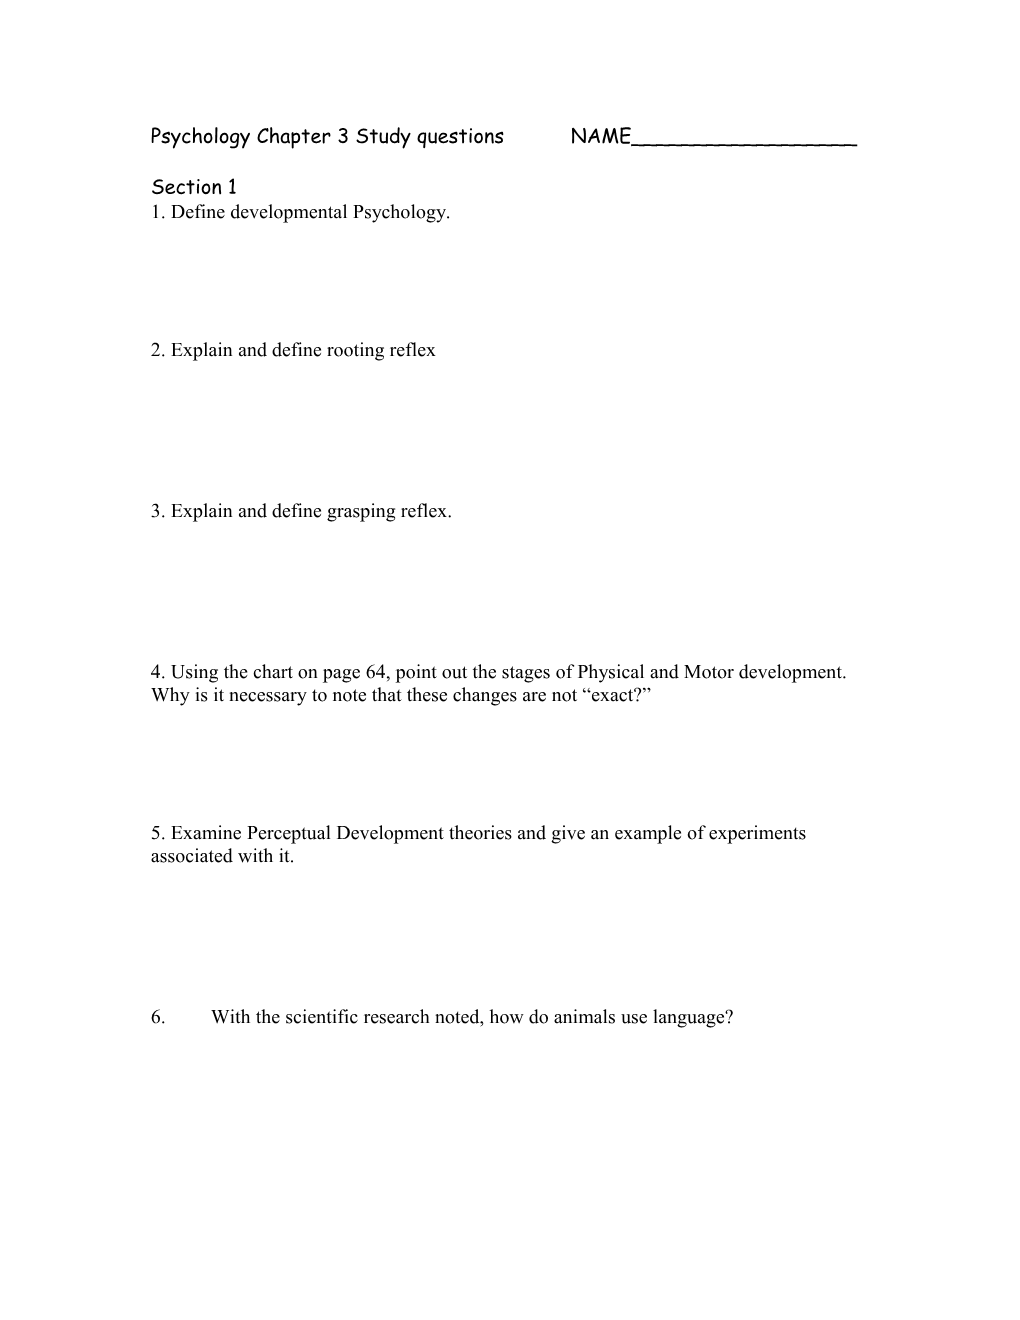 Psychology Chapter 3 Study Questions